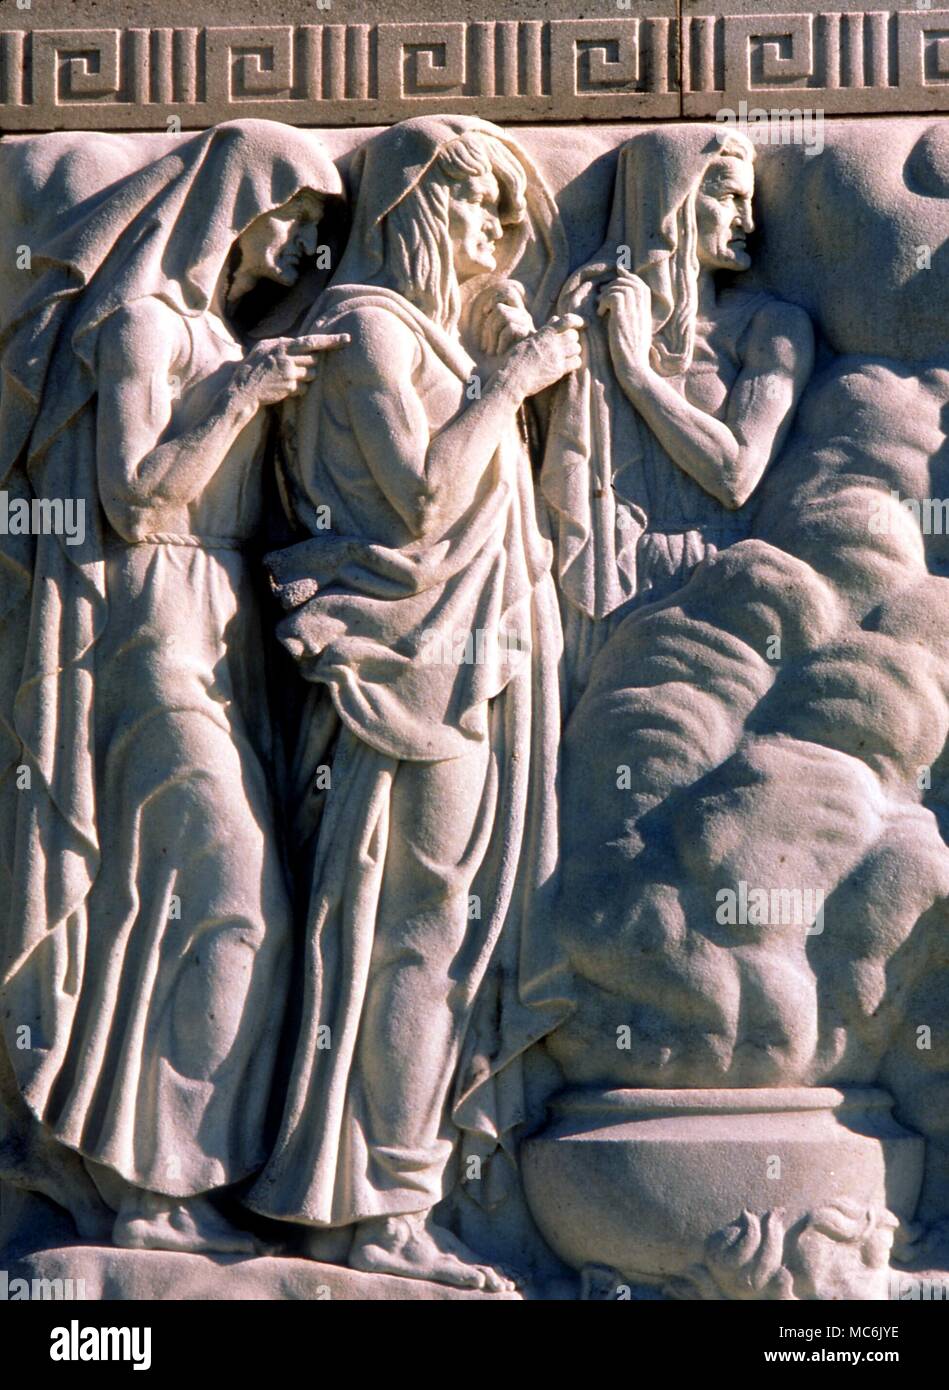 WITCHCRAFT - WITCHES OF MACBETH The three 'weird sisters' who meet Macbeth on the blasted heath. Sculpture on the facade of the Folger Shakespeare Memorial Library in Washington DC. Sculpted by John Gregory, 1932 Stock Photo